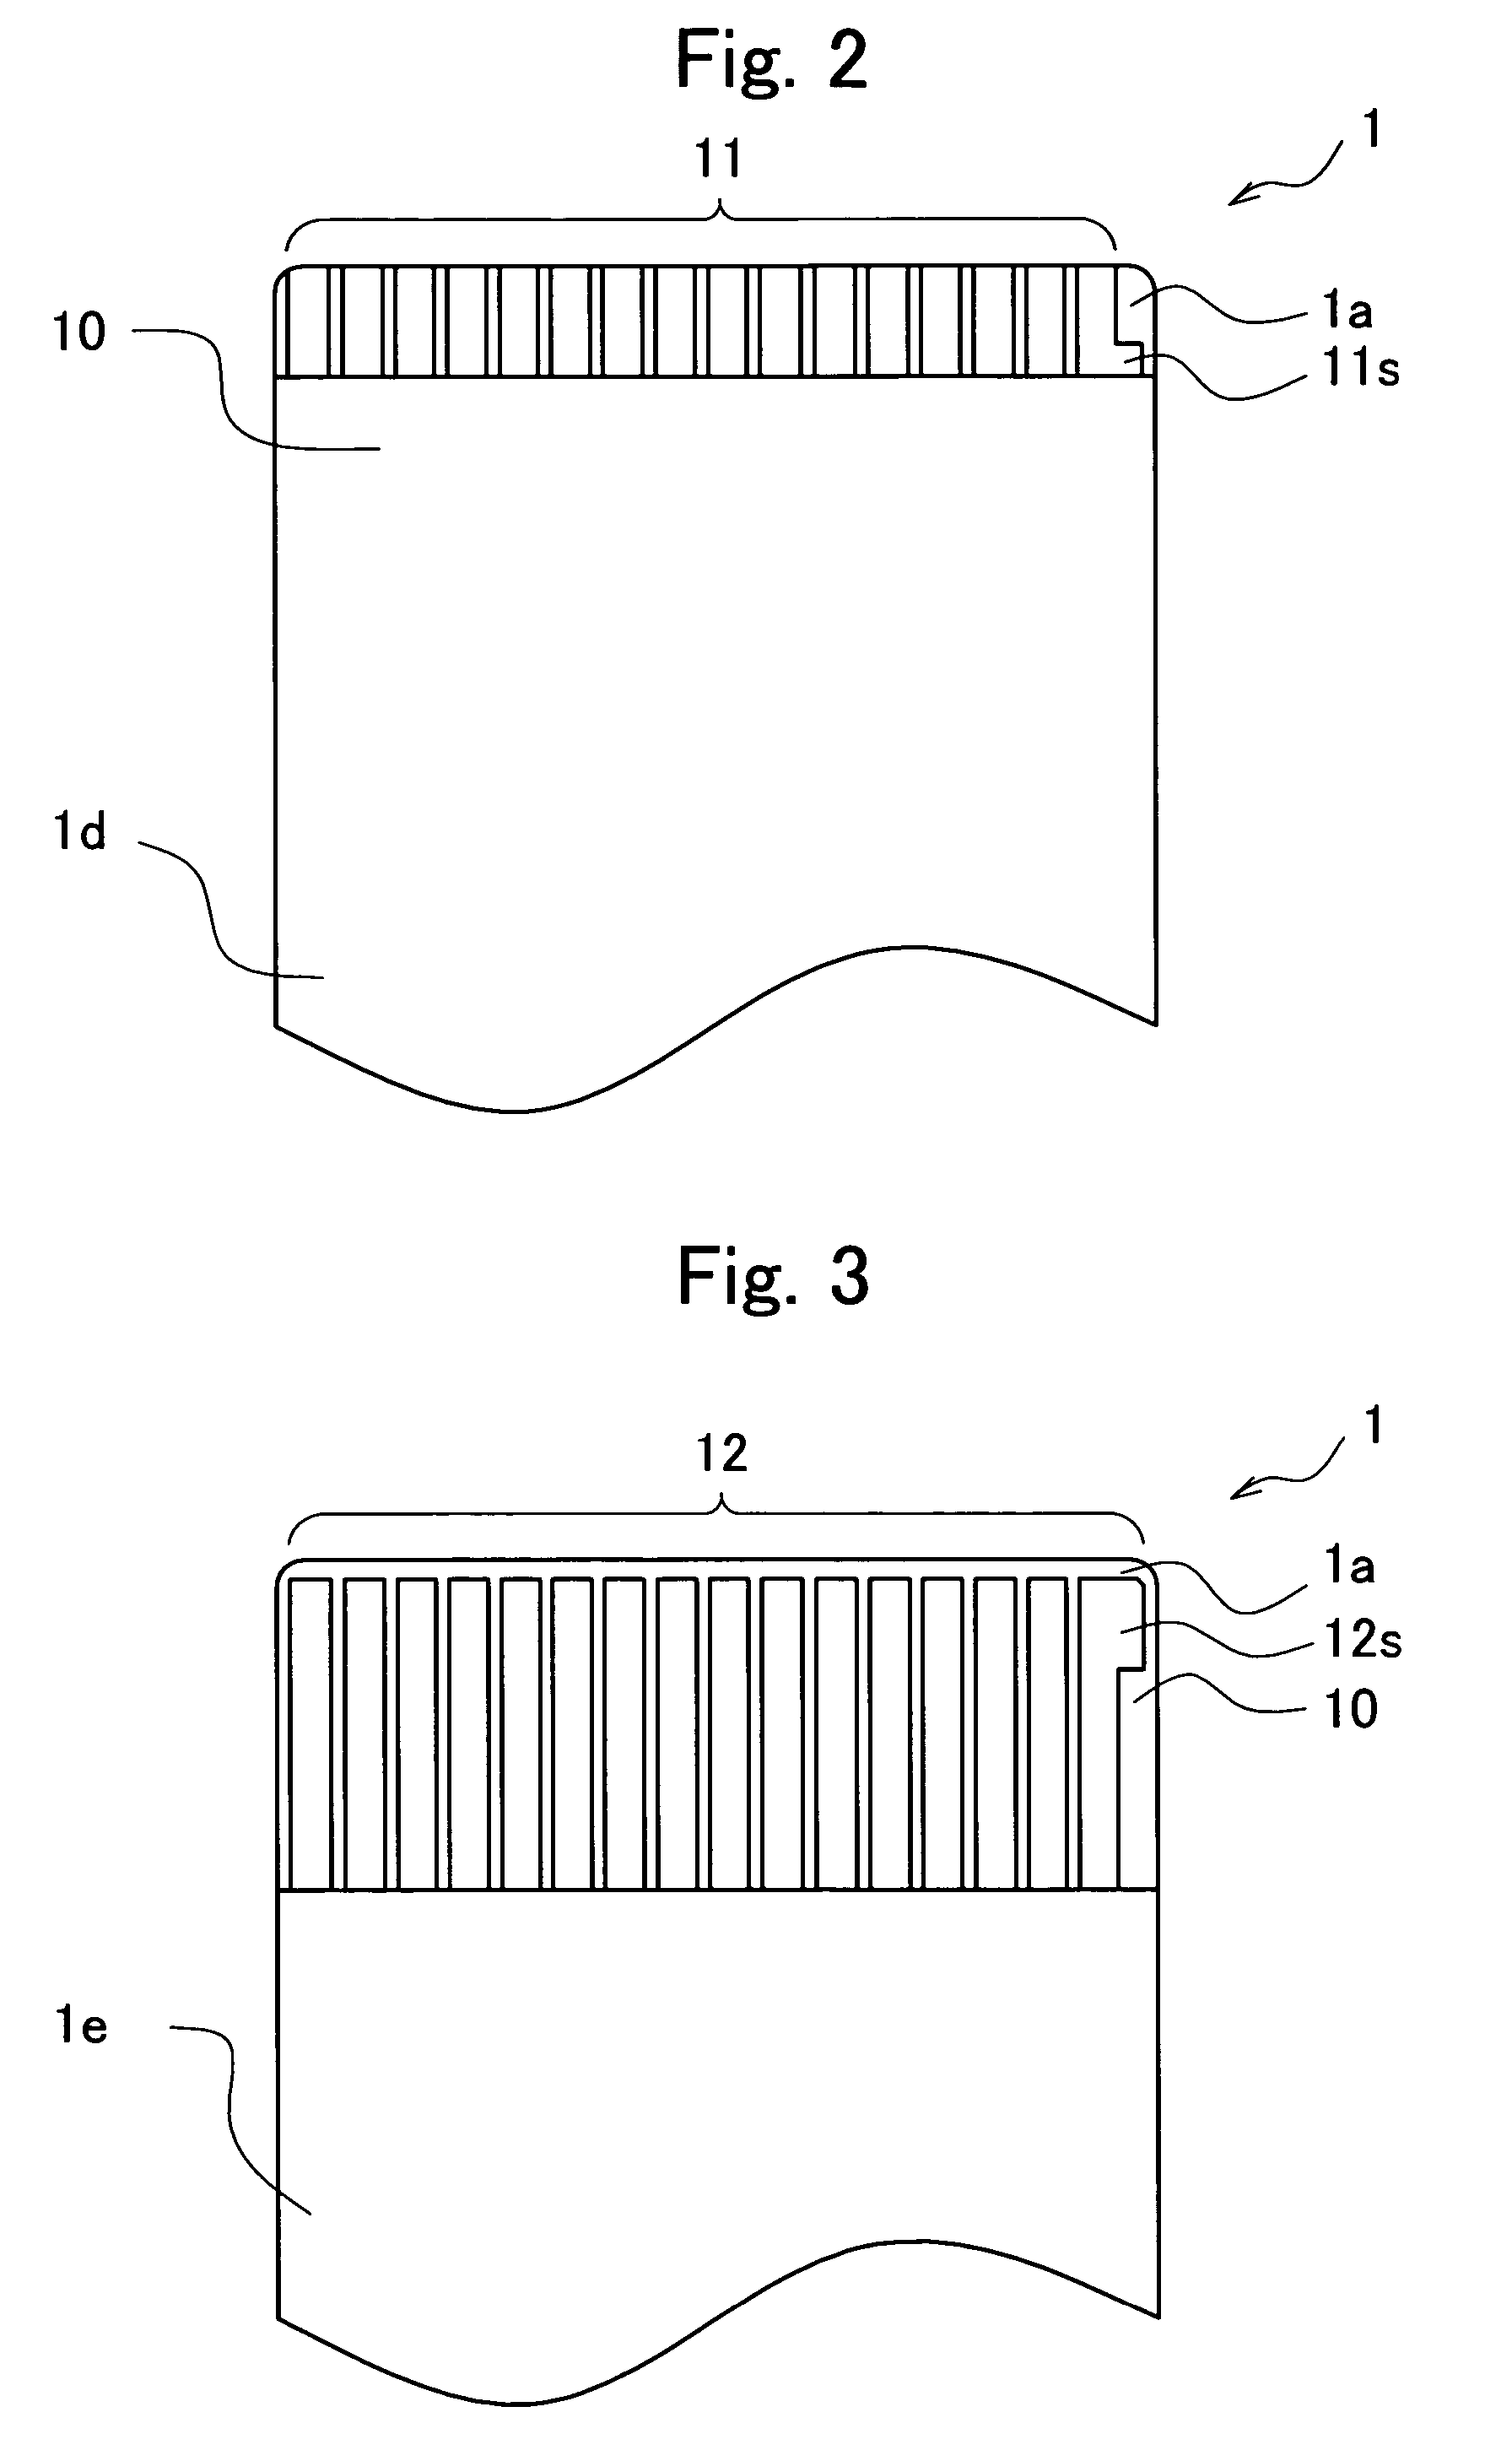 Double-sided flexible printed circuits